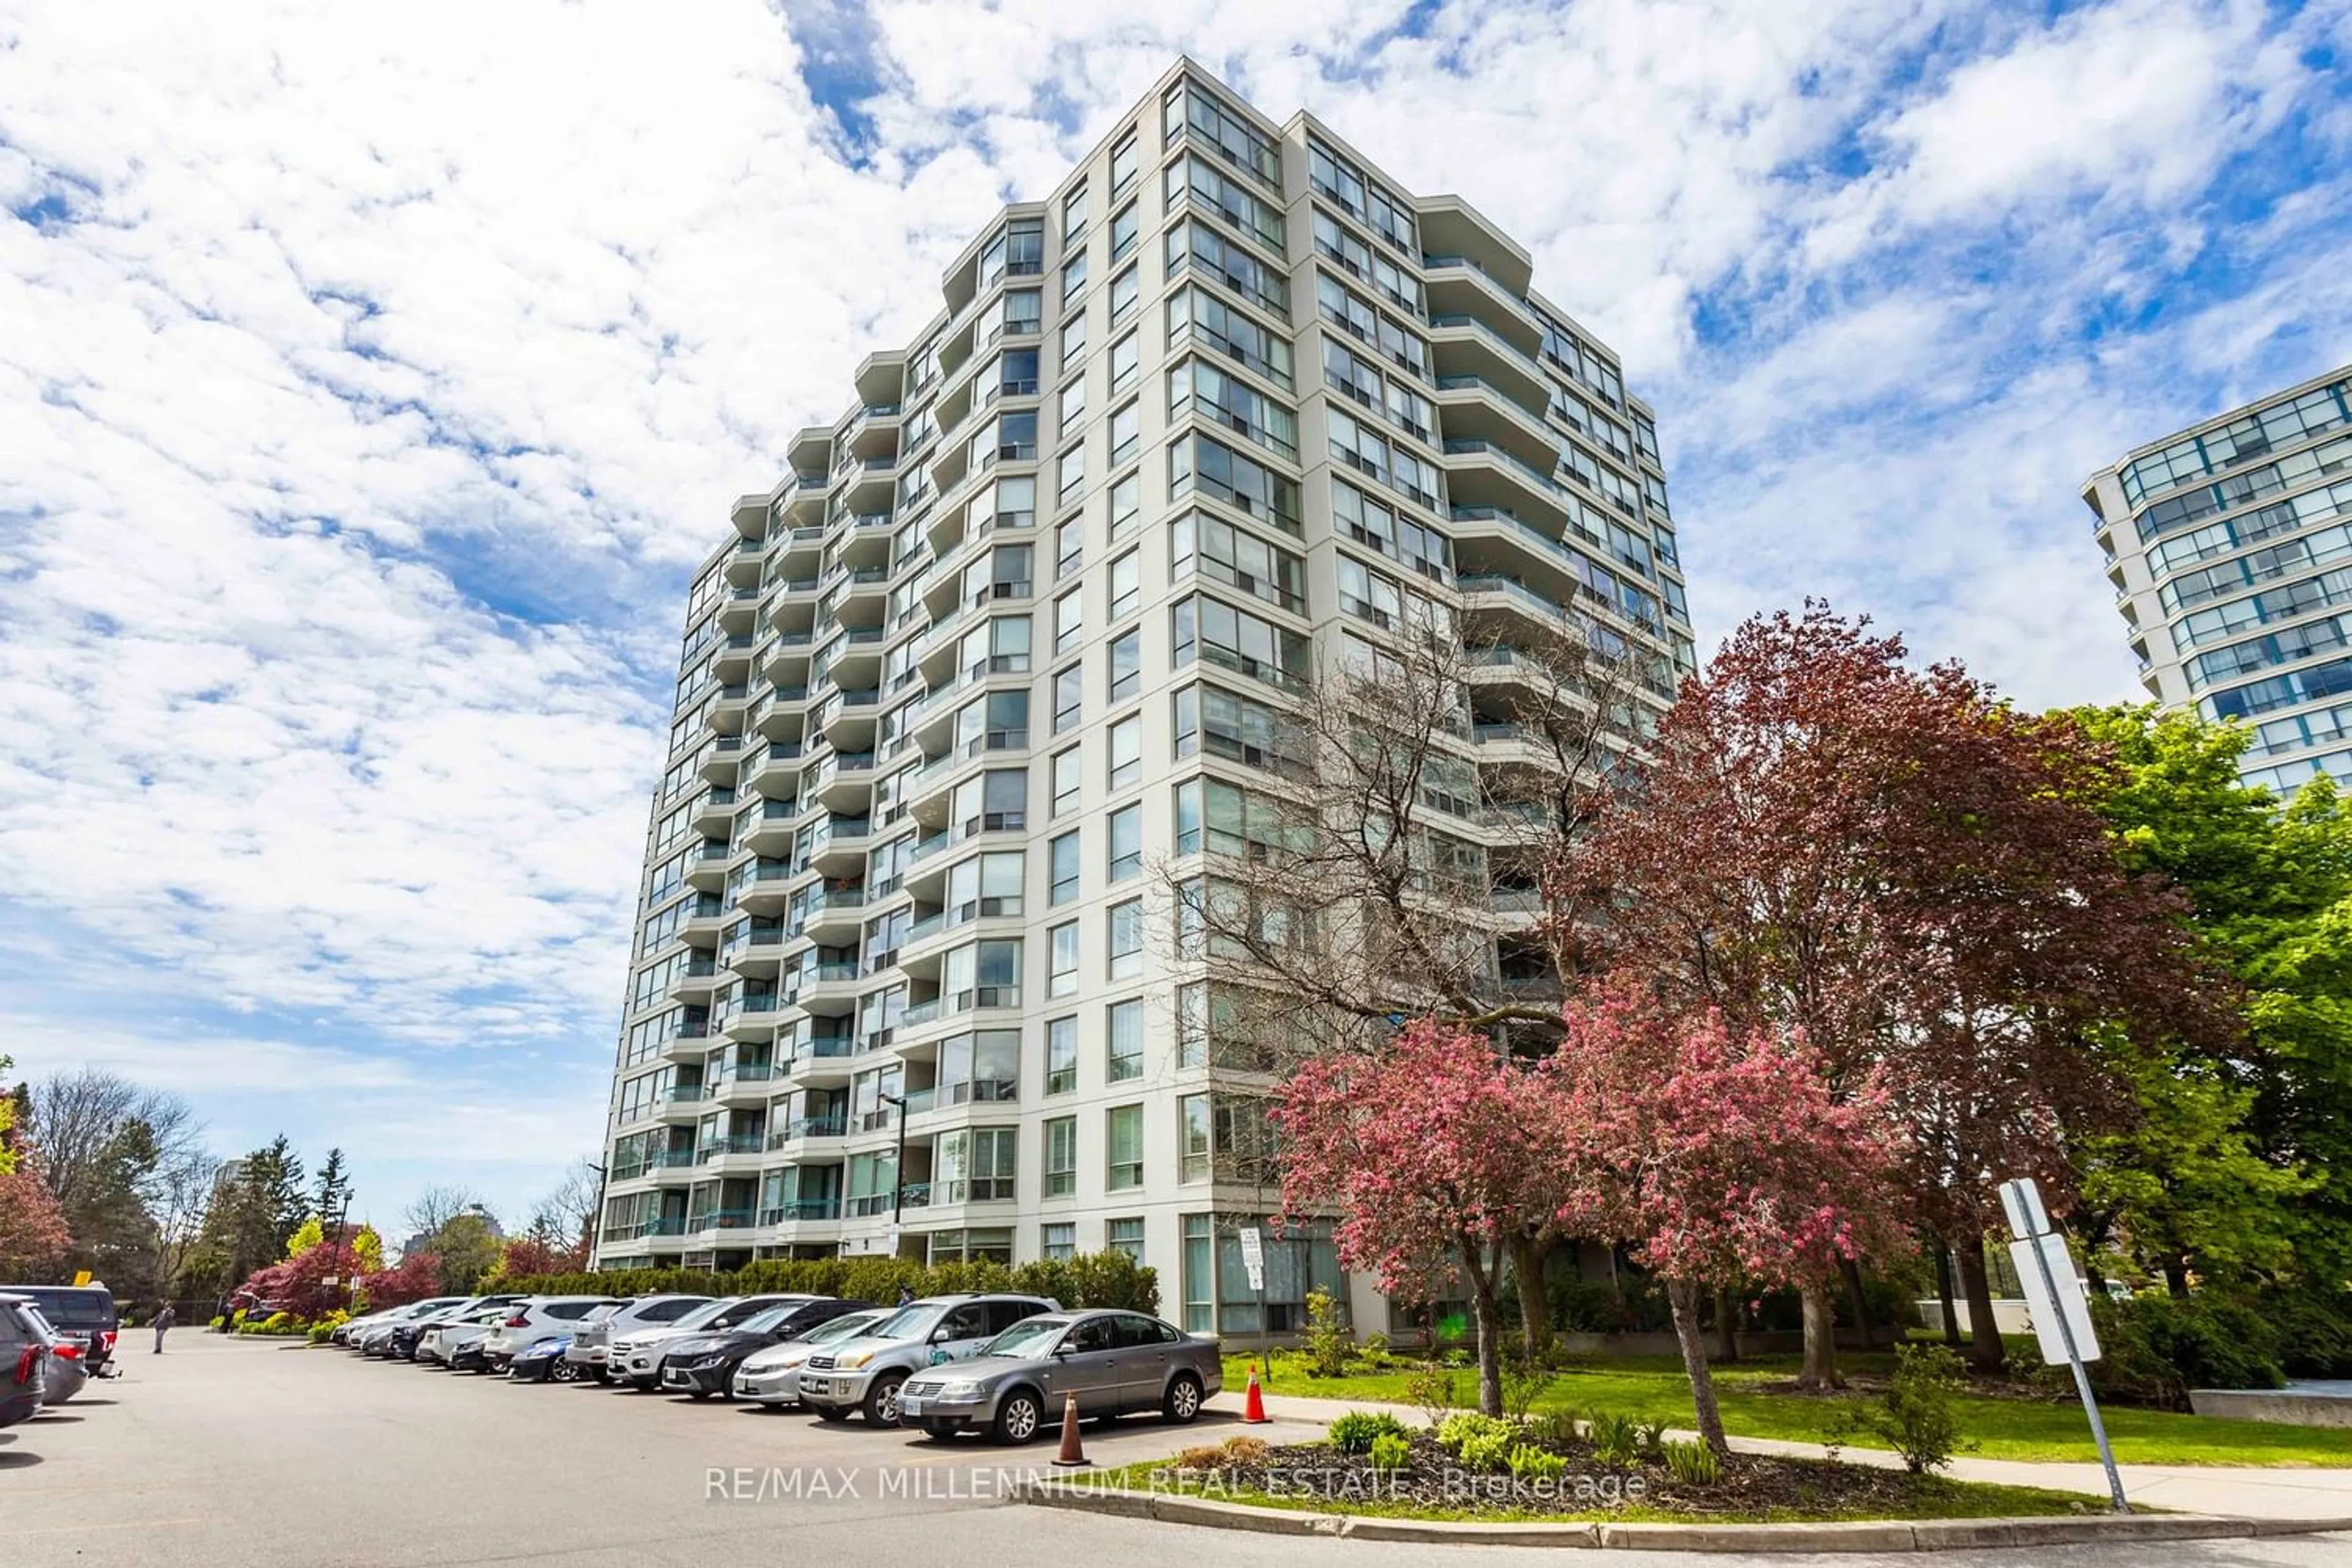 A pic from exterior of the house or condo for 4727 Sheppard Ave #1008, Toronto Ontario M1S 5B3